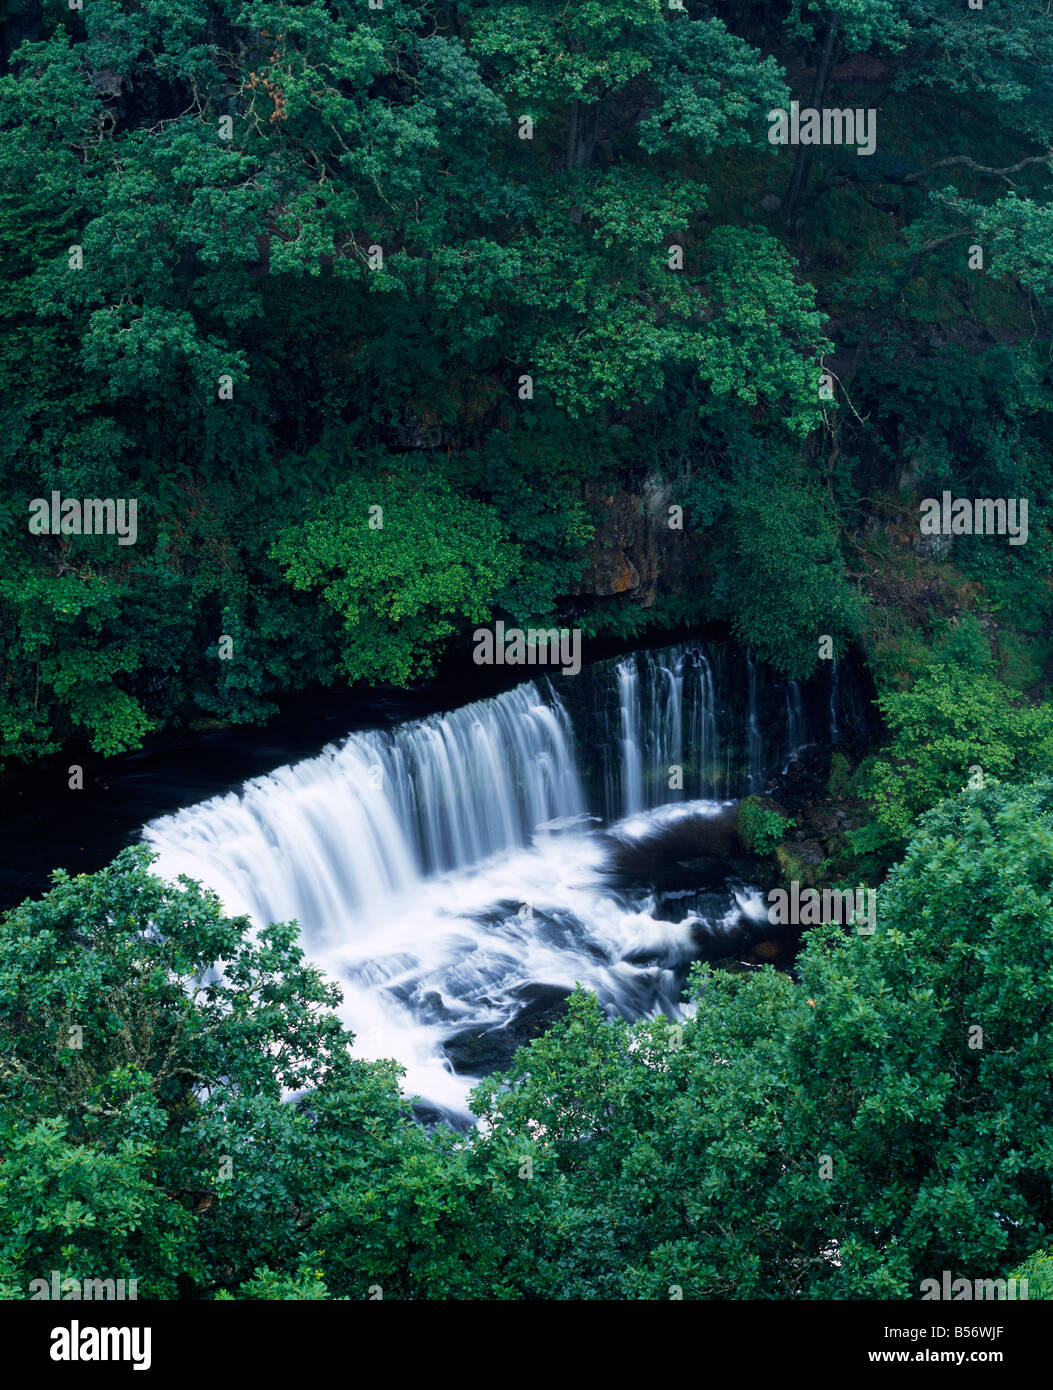 Sgwd Isaf Clun-gwyn waterfall on the River Mellte near Pontneddfechan in the Brecon Beacons National Park, South Wales. Stock Photo